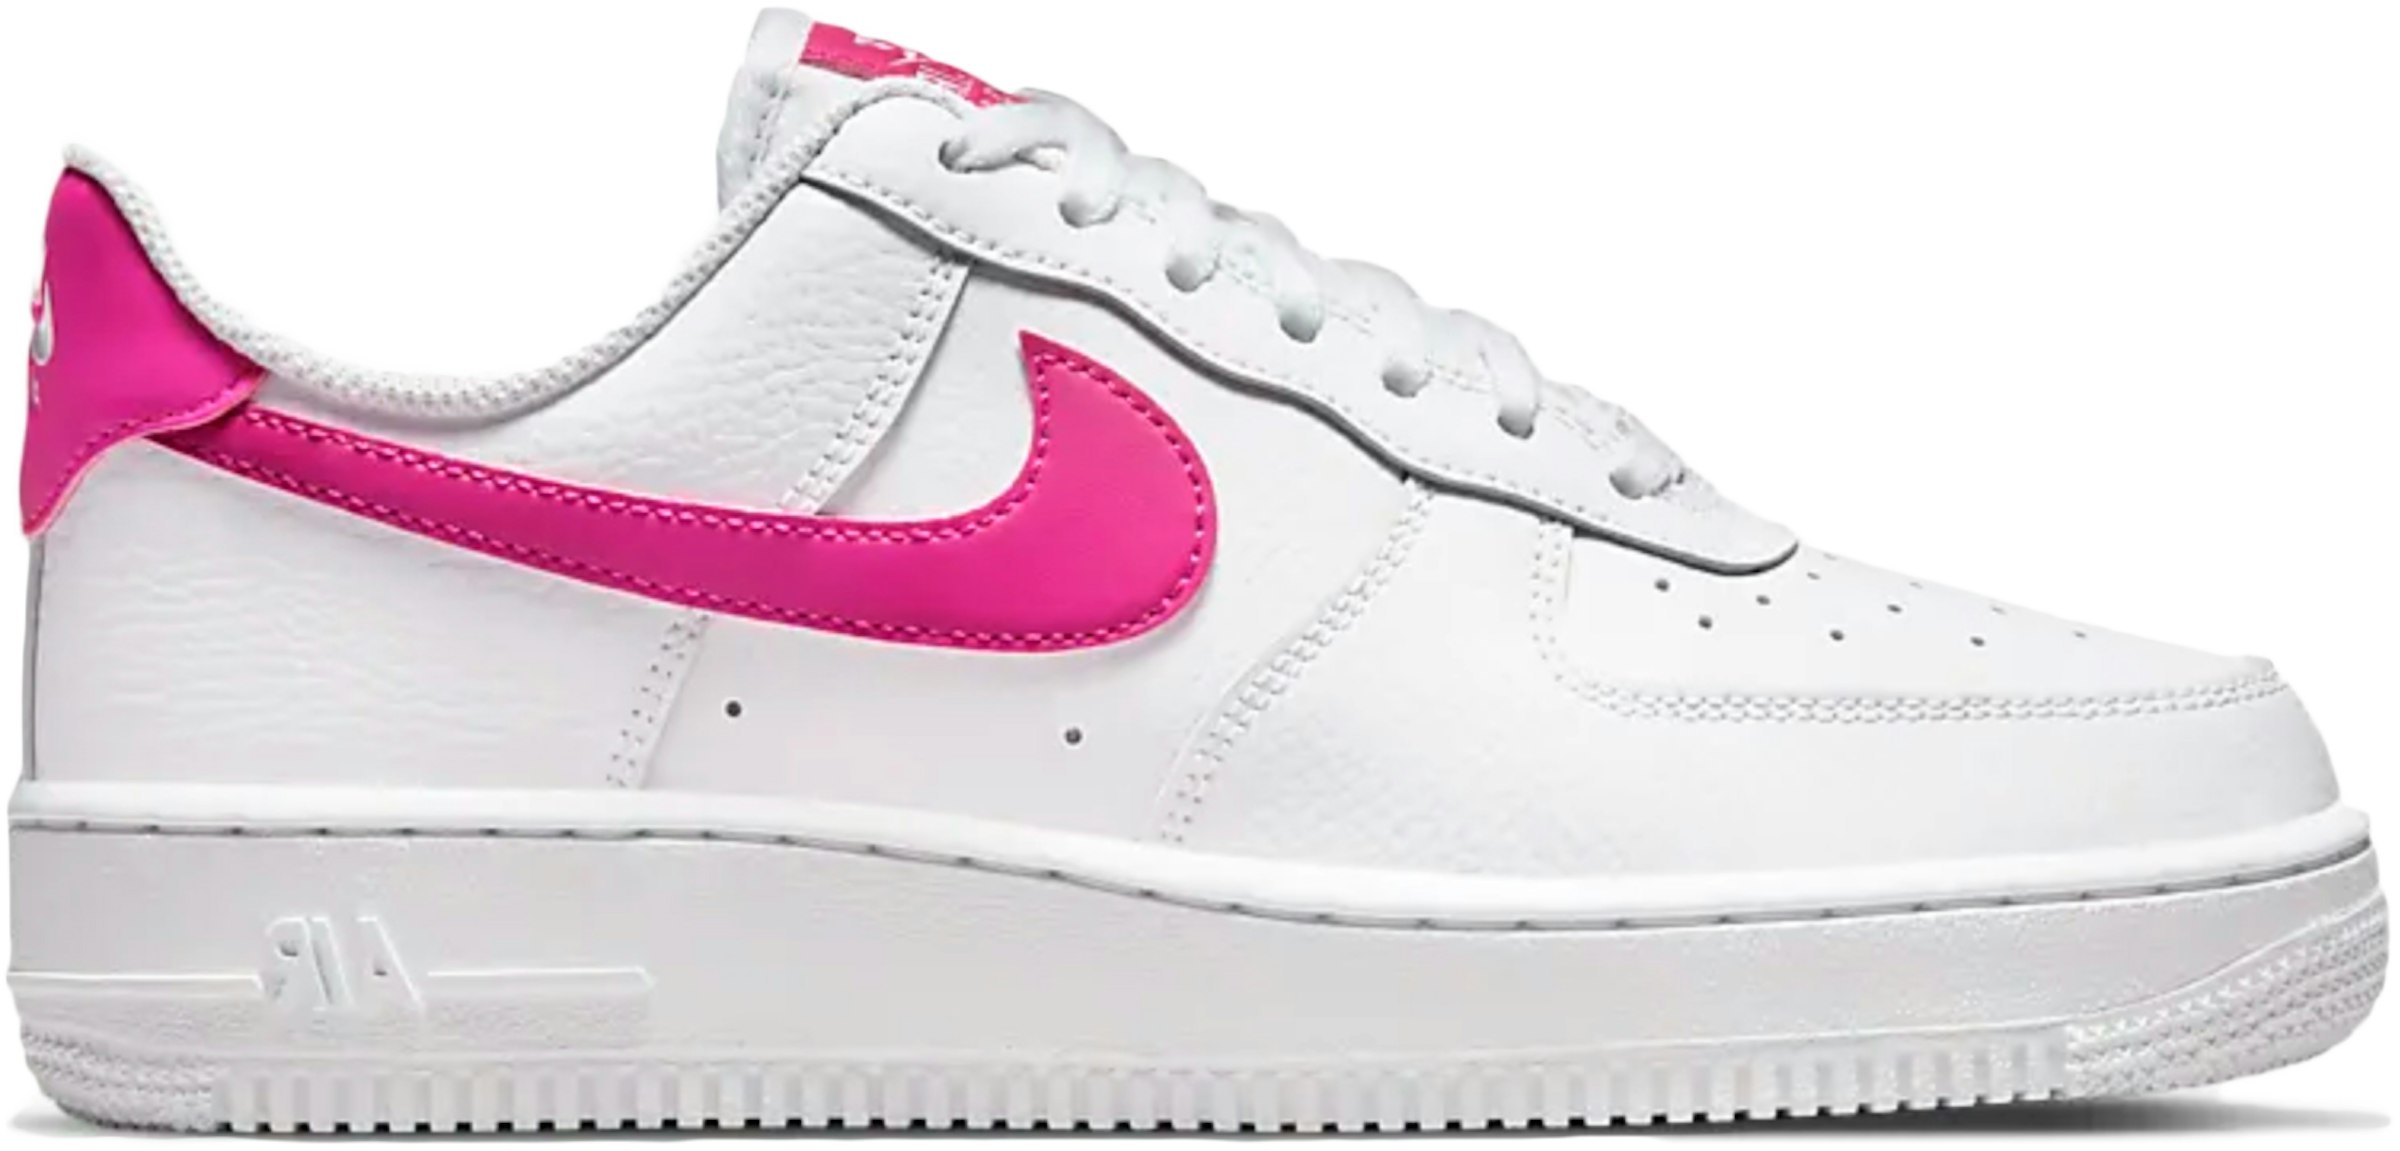 Air 1 Low White Pink Prime (Women's) DD8959-102 - US